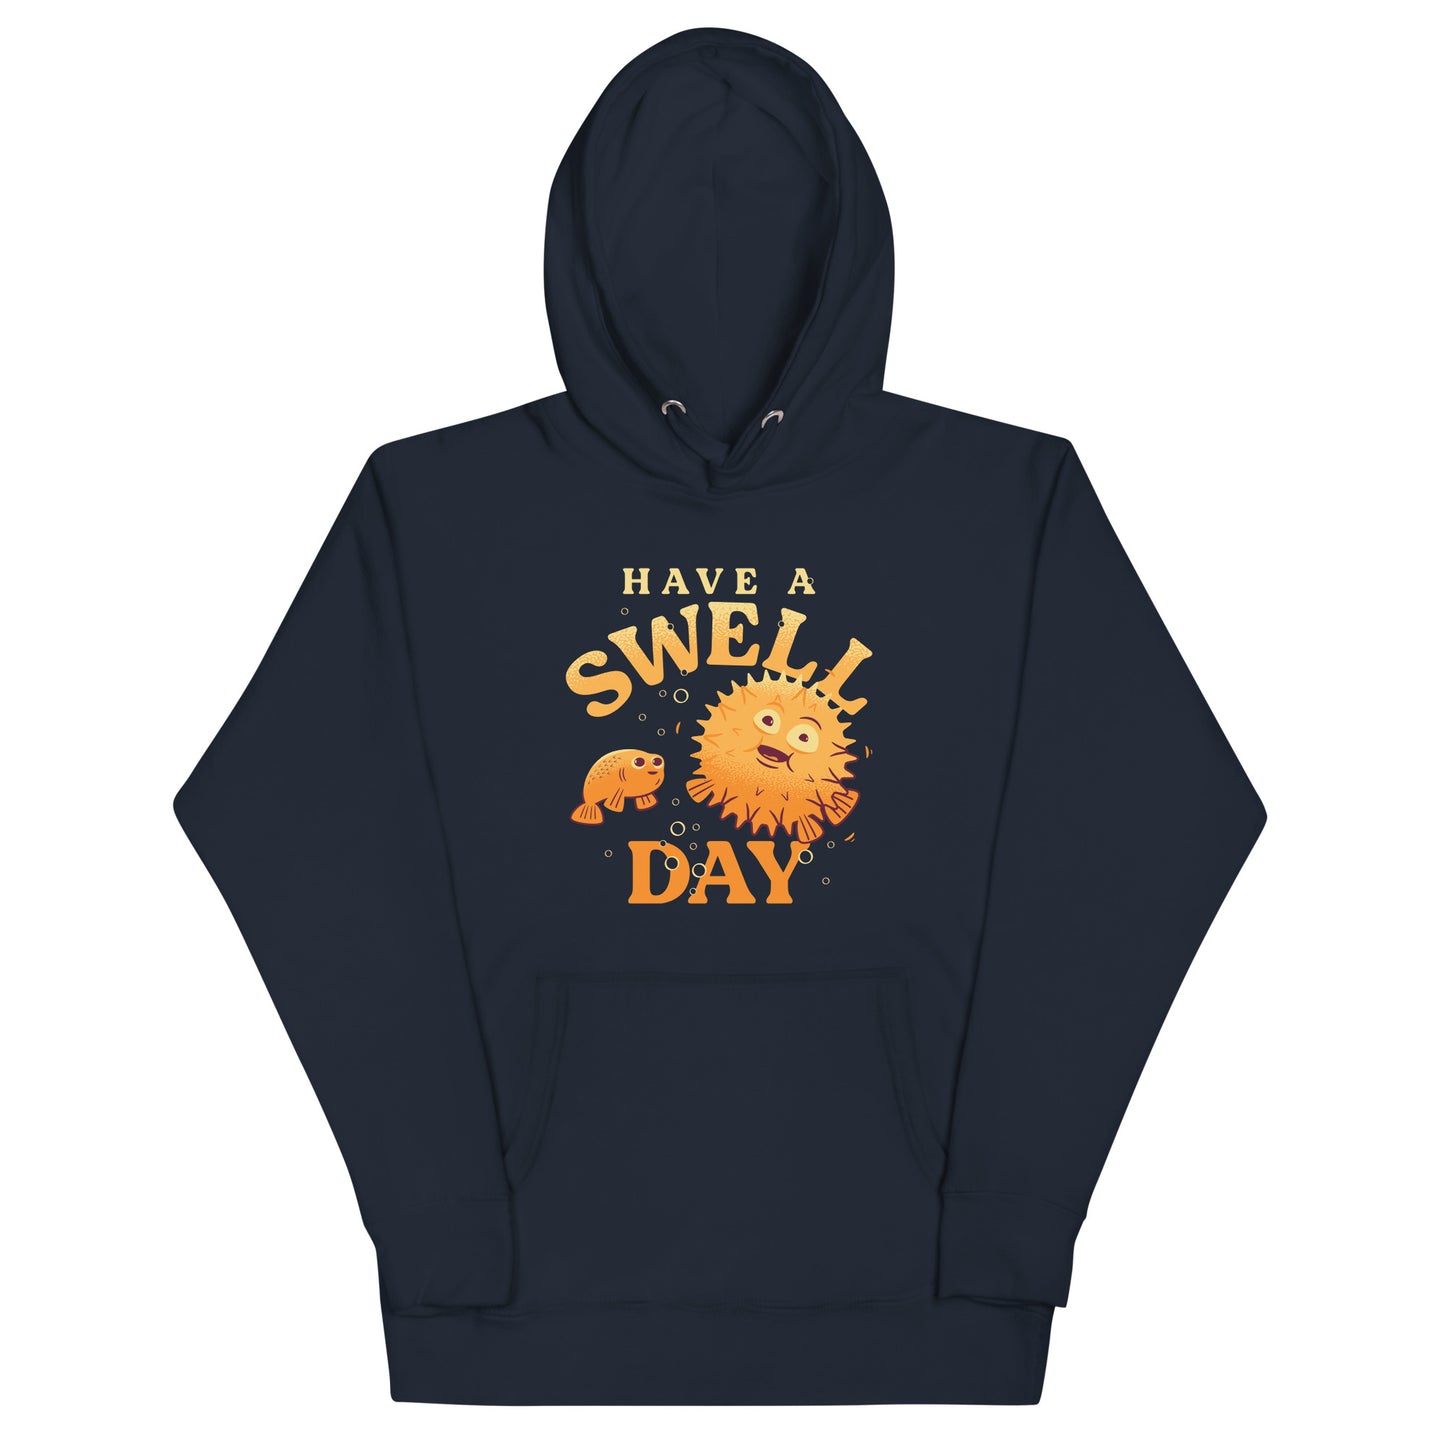 Have A Swell Day Unisex Hoodie